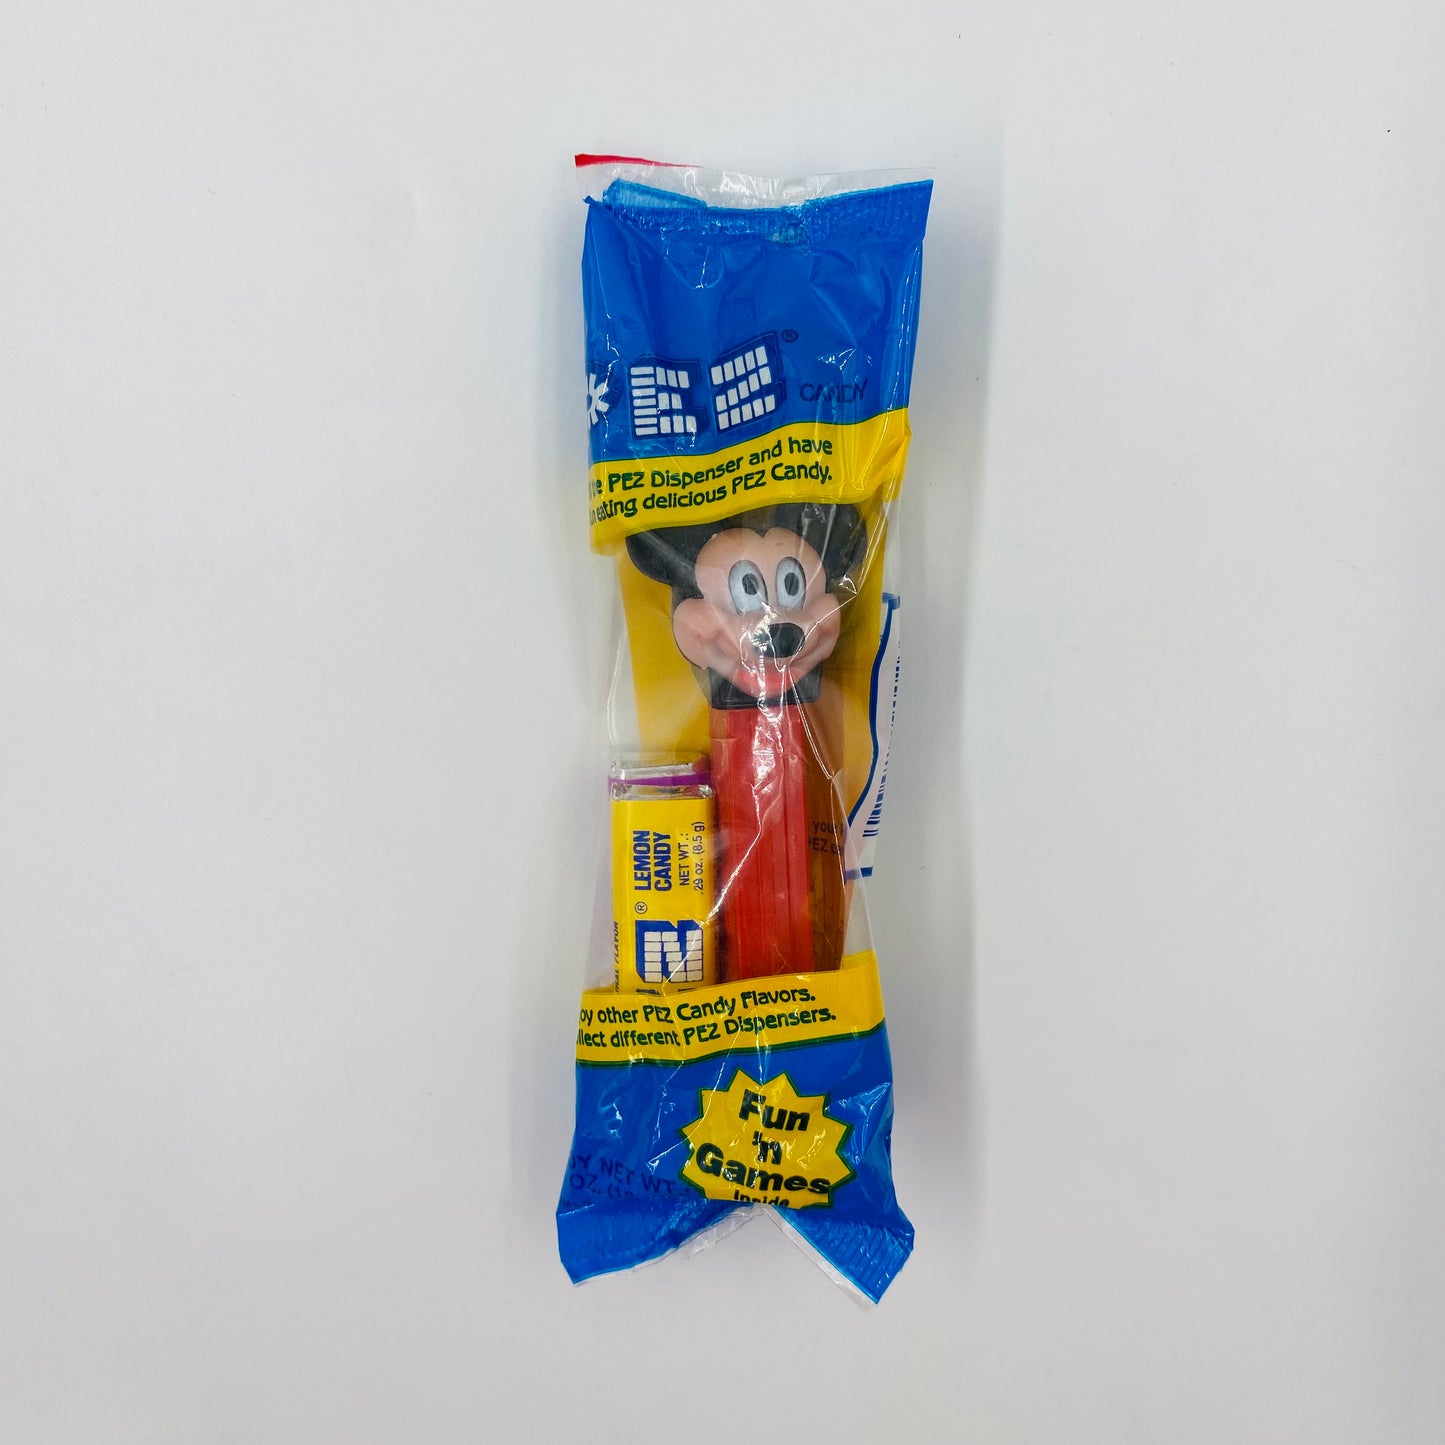 Disney Mickey Mouse PEZ dispenser (1989) bagged 4.9 Hungary